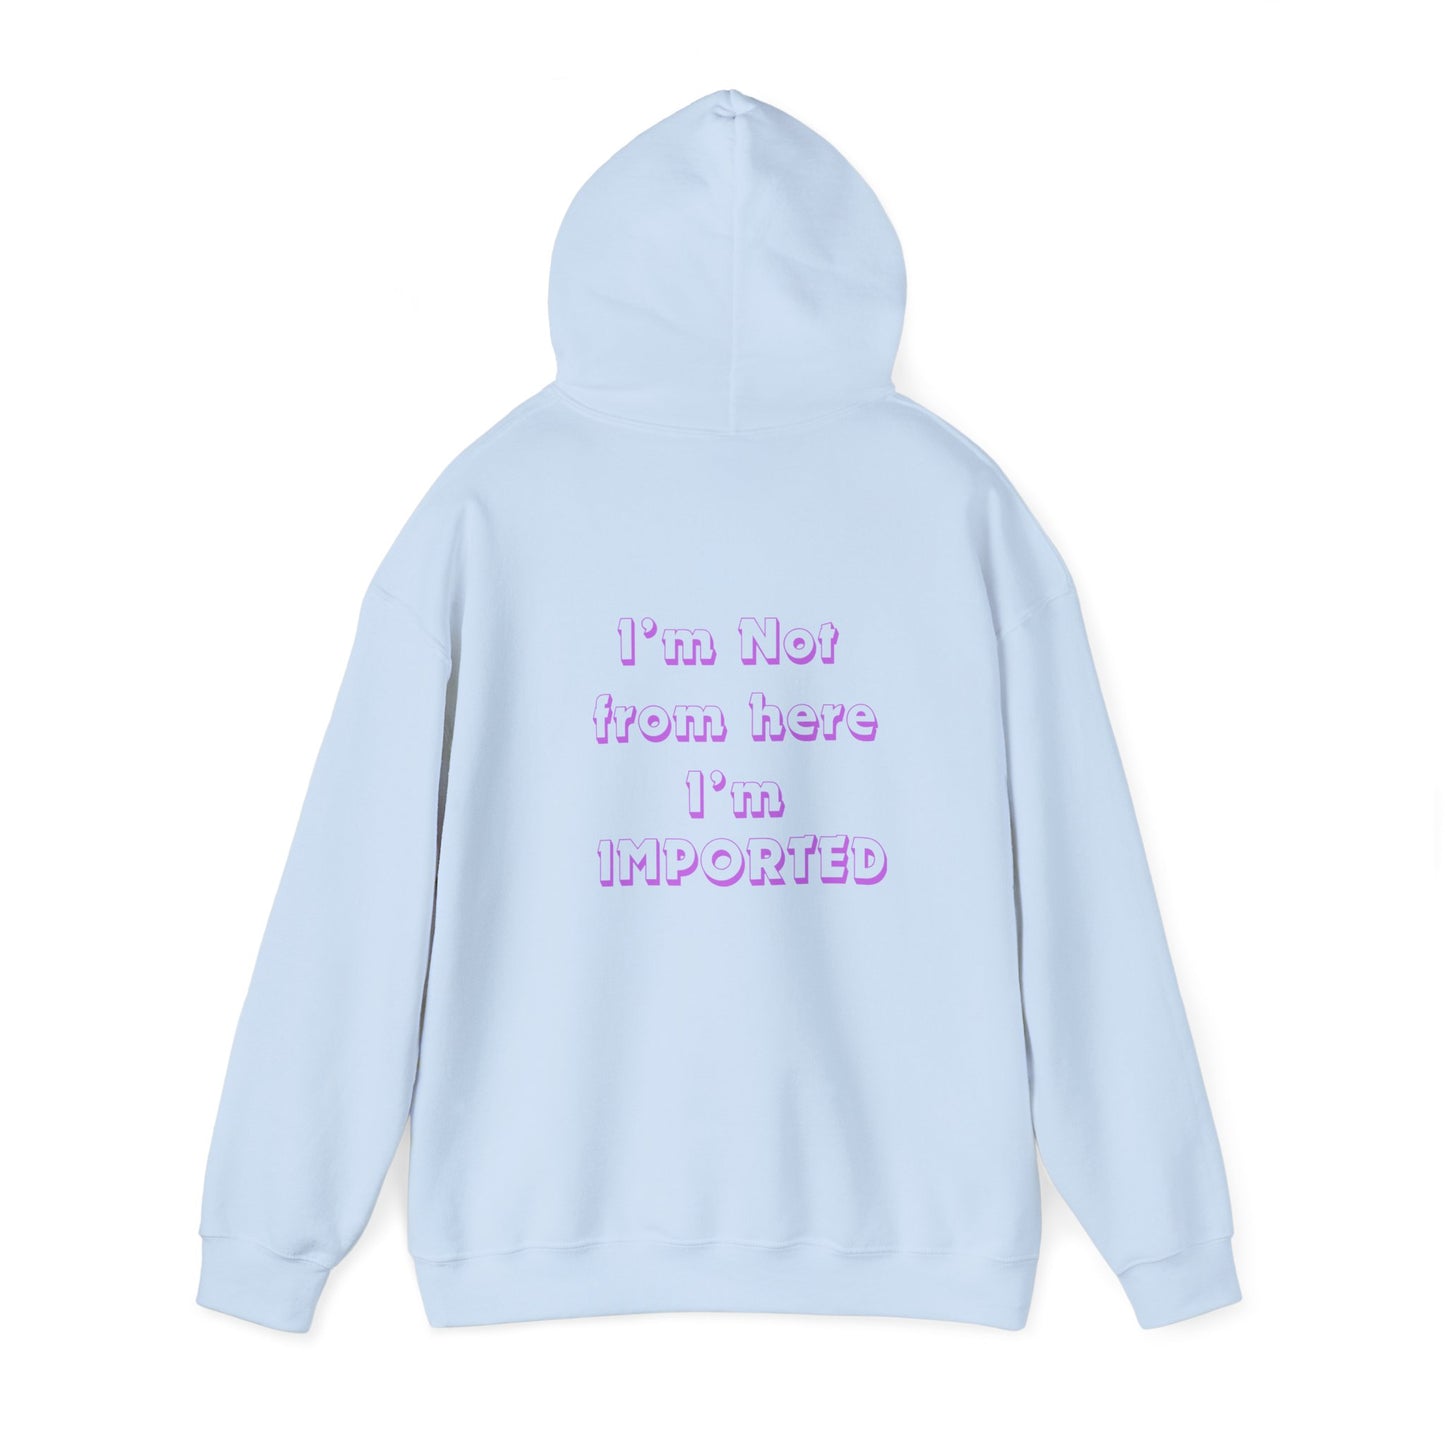 Unisex Heavy Blend™ "I'm Not From here, I'm imported" Hooded Sweatshirt